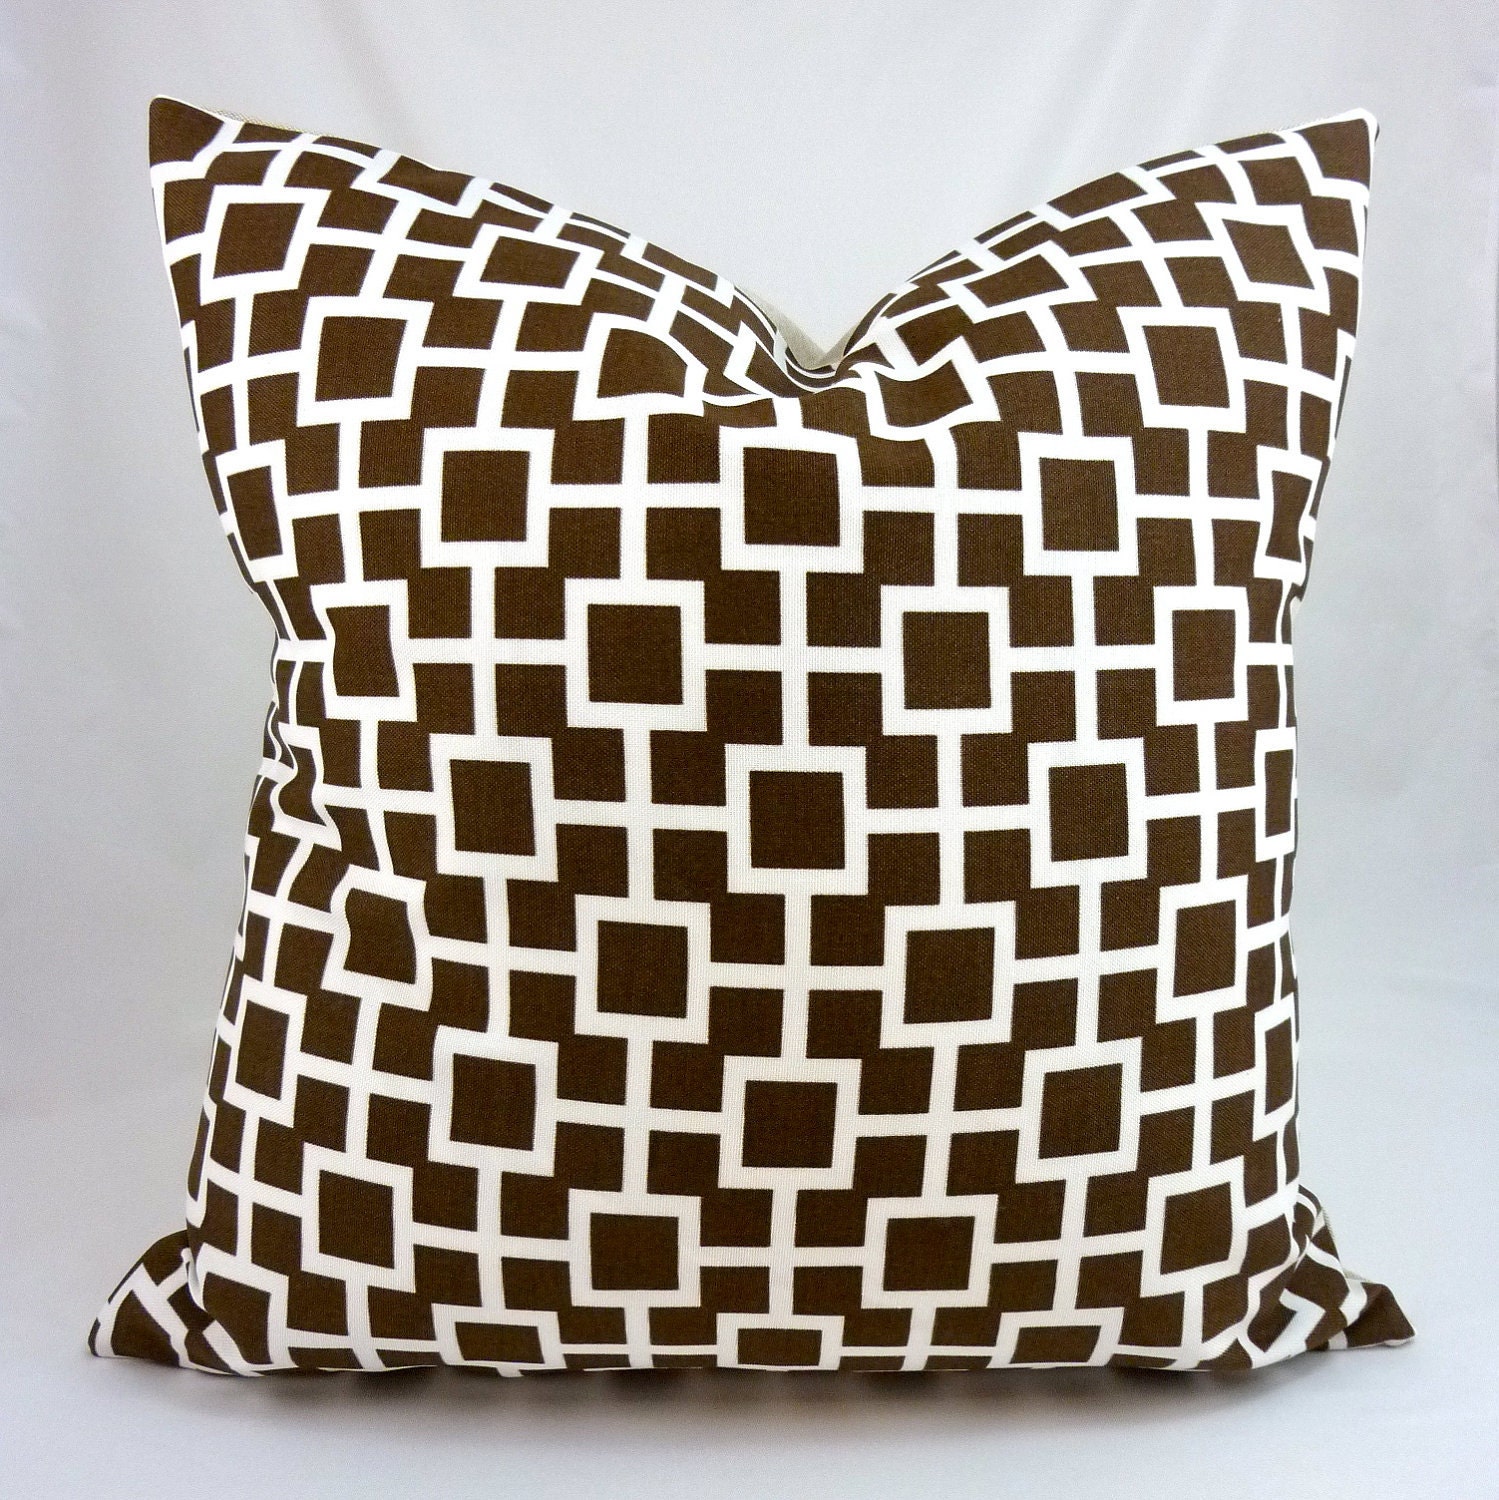 Designer Pillow Cover in Baja Lattice Driftwood - 18x18 or 20x20 (White Geometric Pattern on Chocolate Brown)